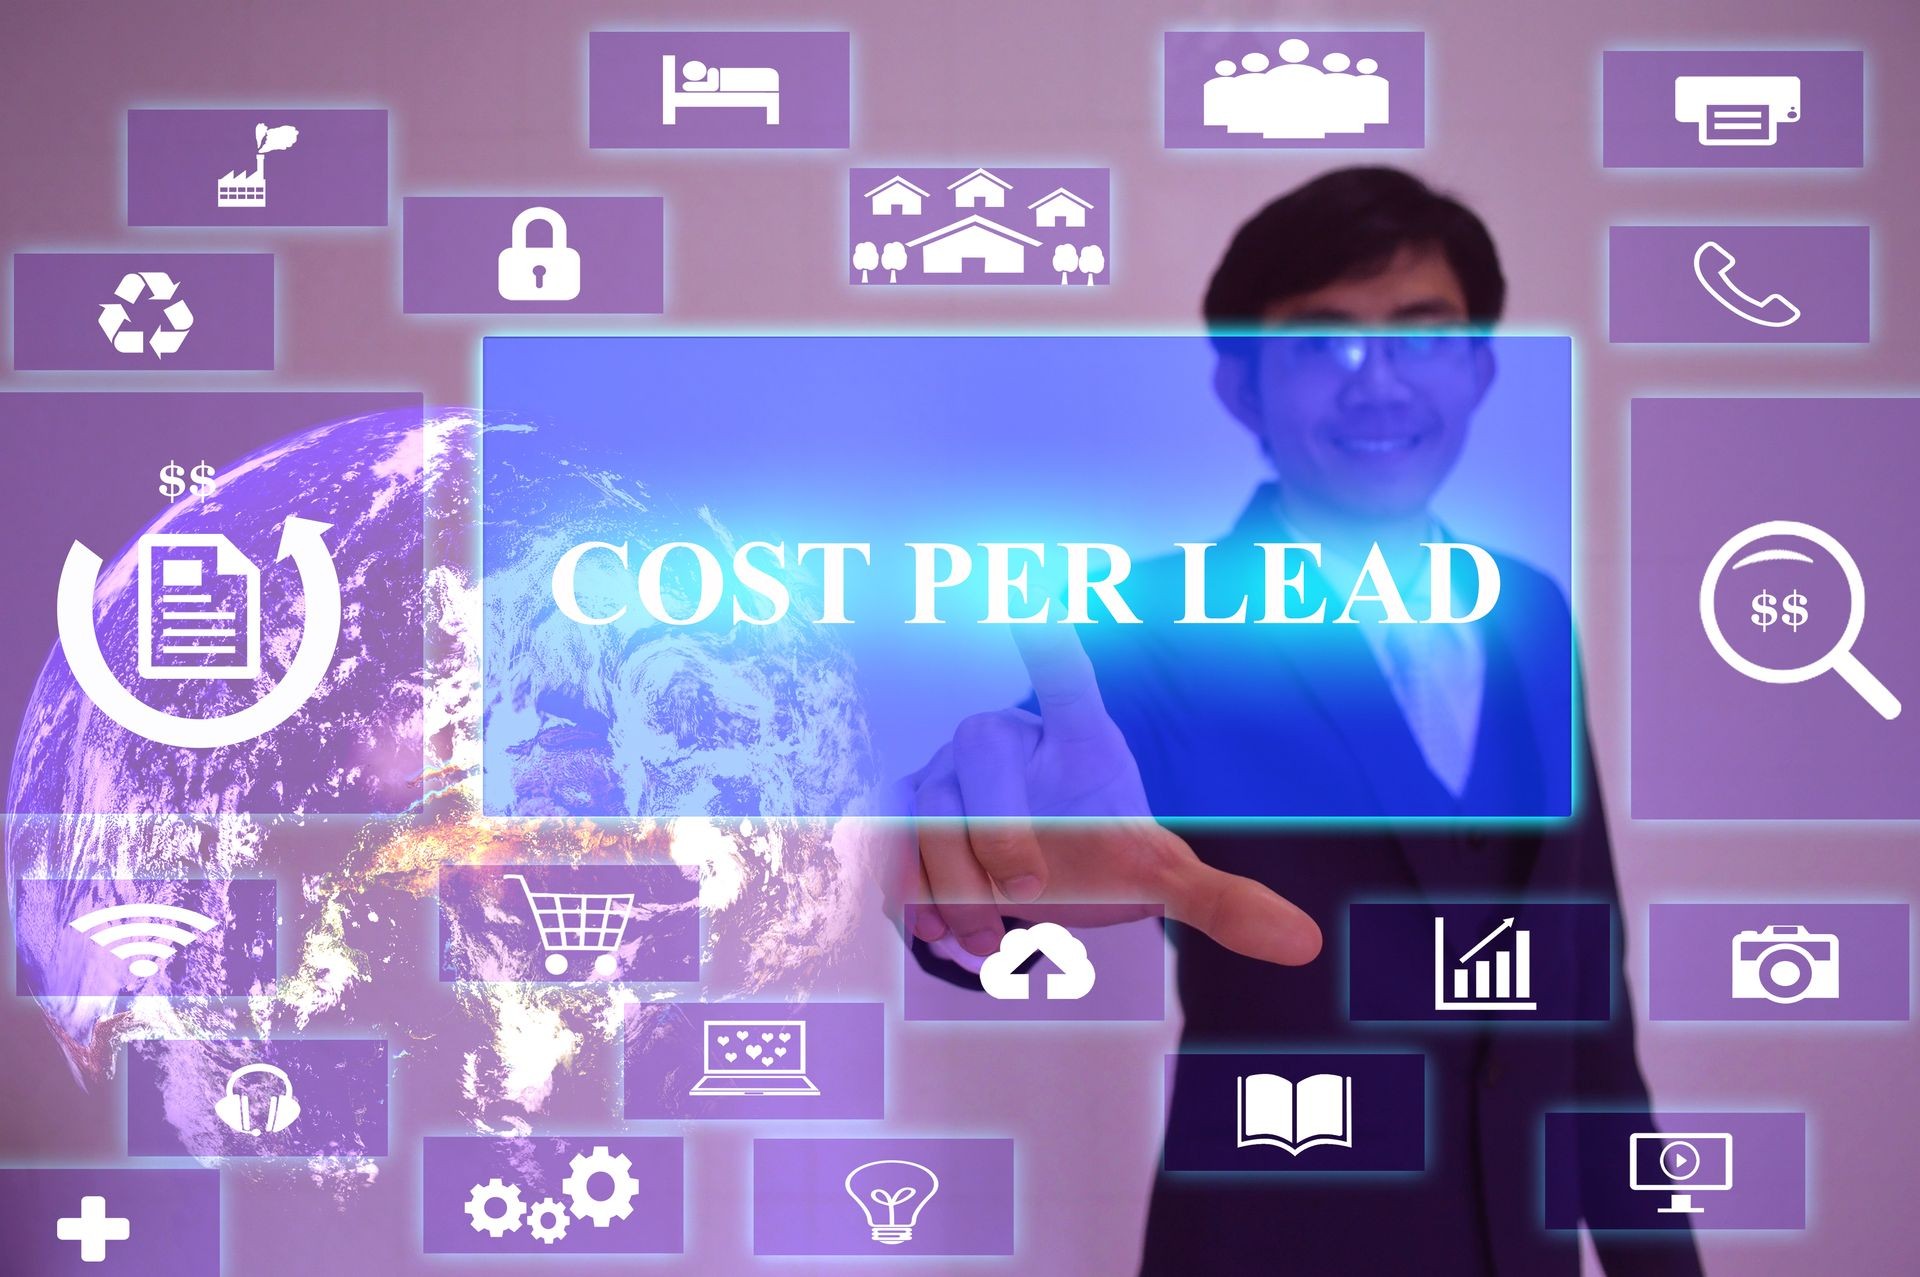 COST PER LEAD concept  presented by  businessman touching on  virtual  screen ,image element furnished by NASA